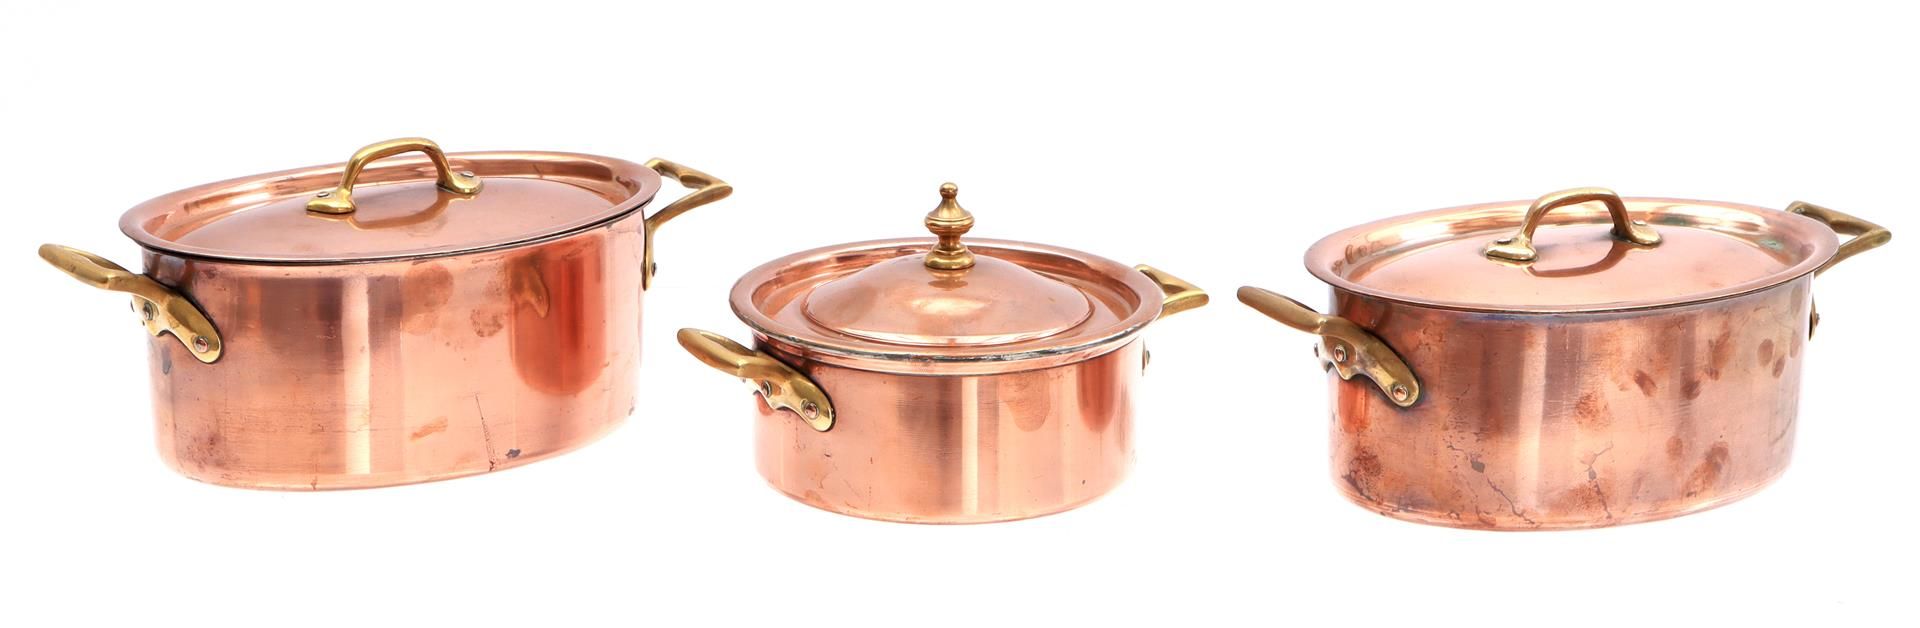 3 red copper lidded pans